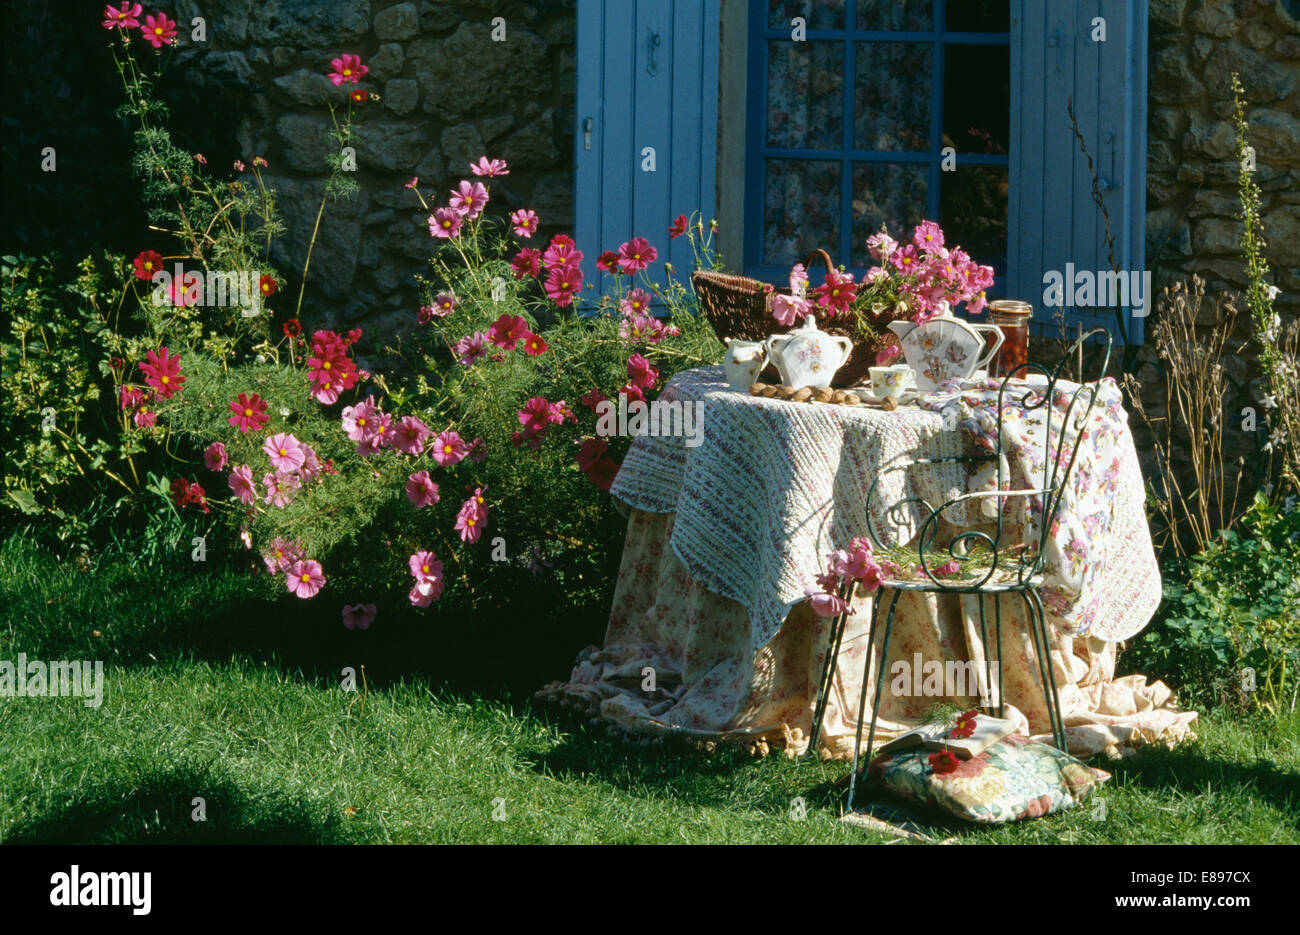 Vintage quilts on table in front of pink cosmos and window with blue shutters Stock Photo